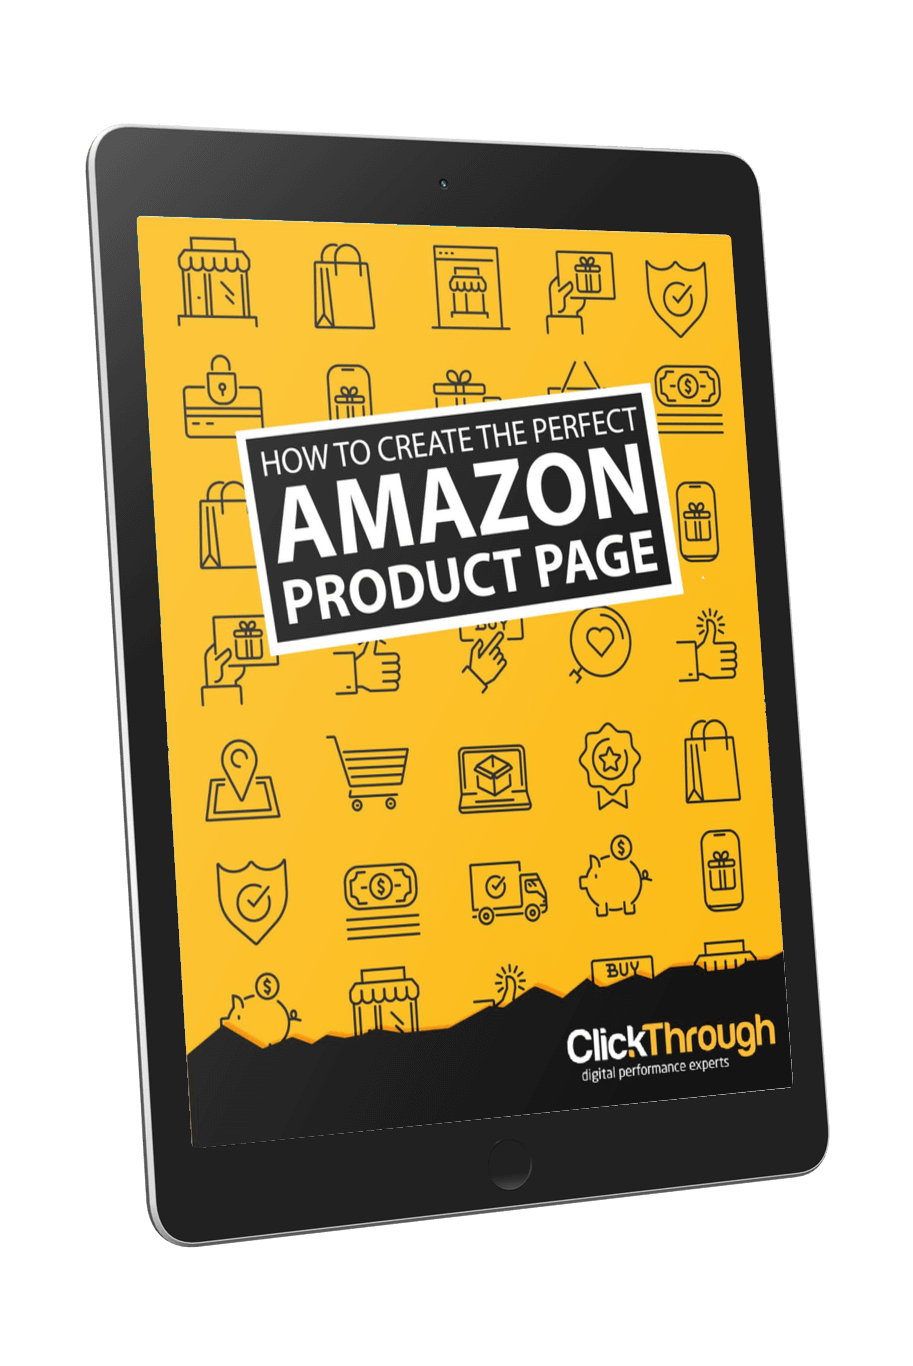 Amazon product page ebook cover (1)